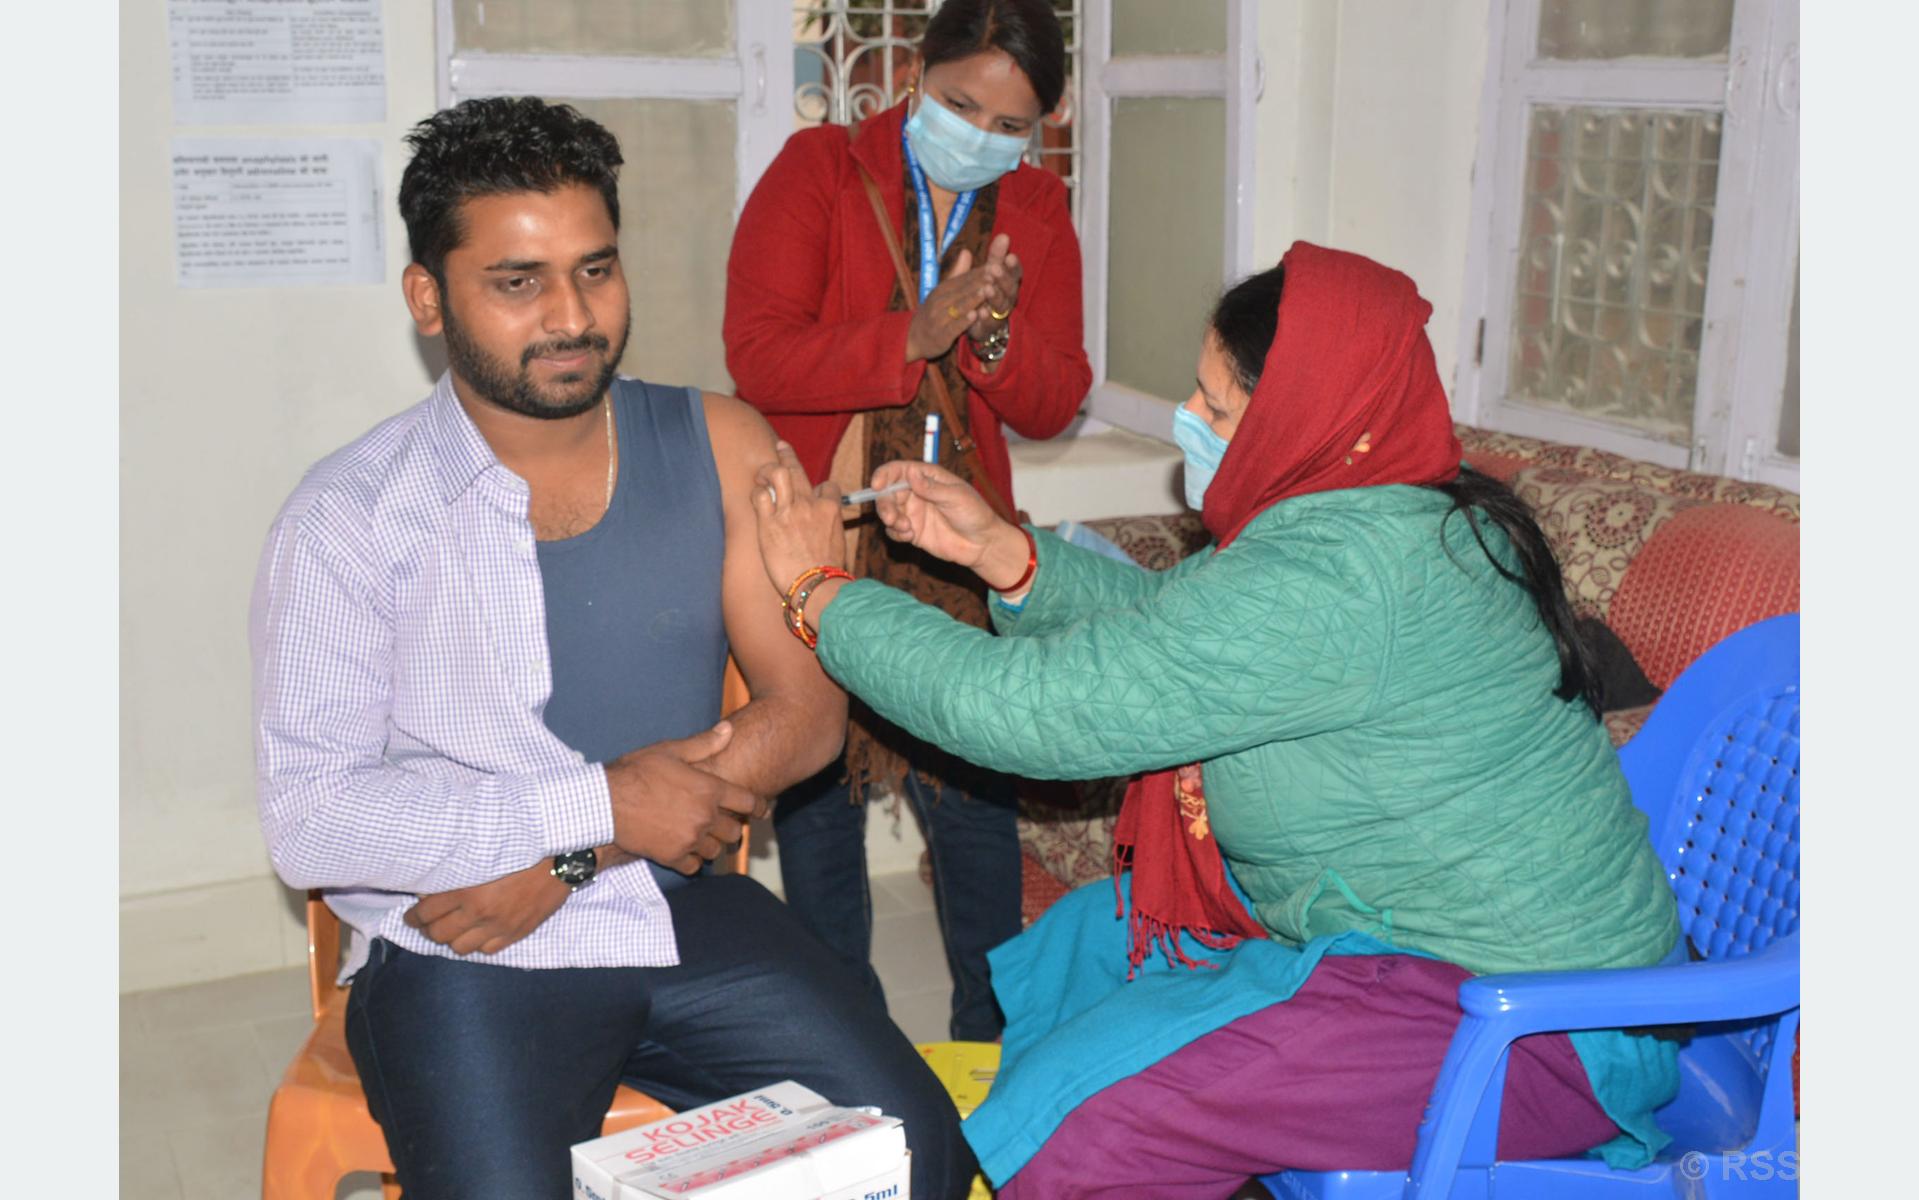 9,084 received COVID-19 vaccine on first day: Health Ministry